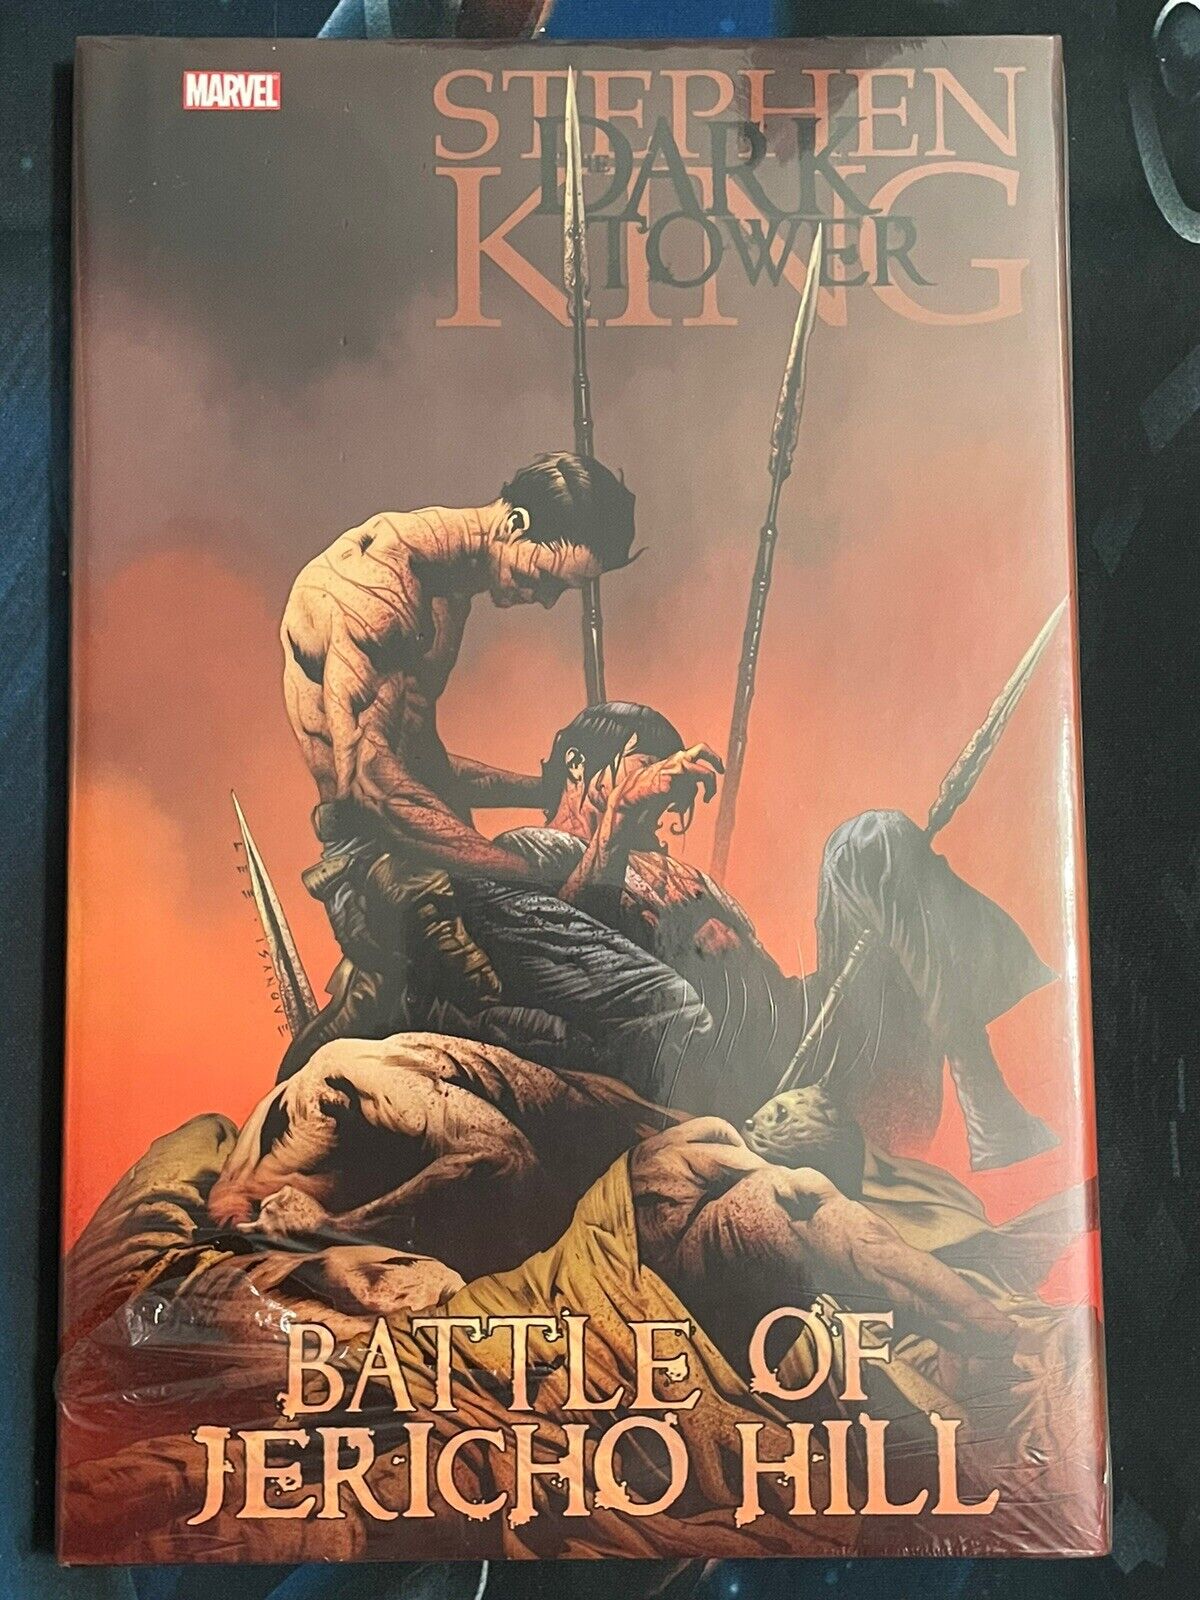 The Dark Tower - Battle Of Jericho Hill - Marvel - NEW SEALED - Stephen King